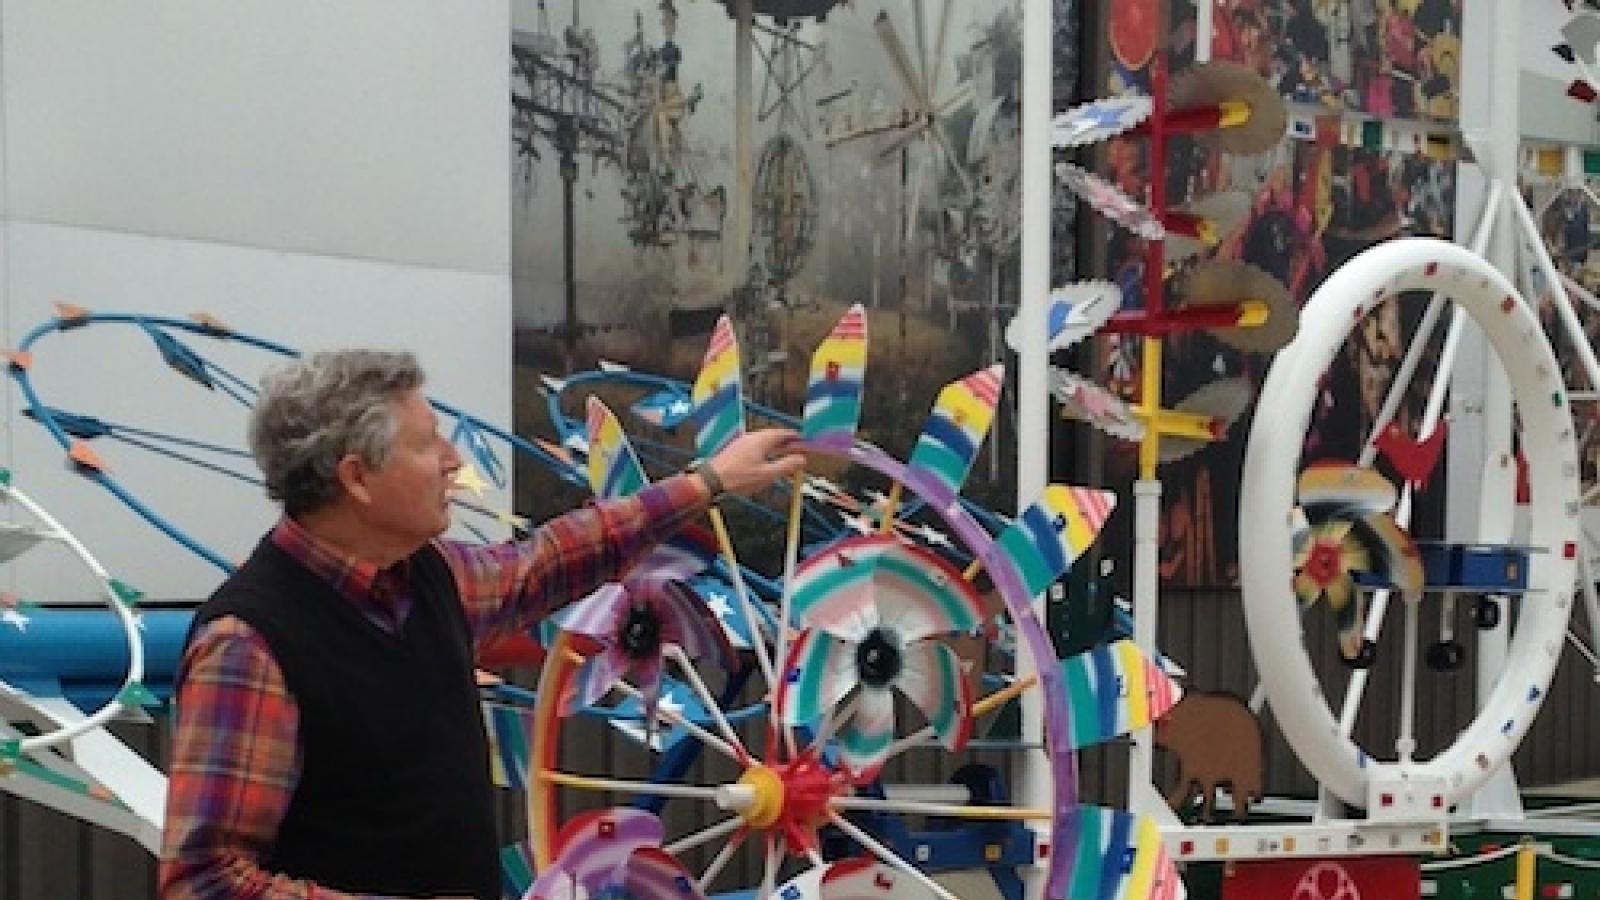 A man shows off a whirligig which is like a looks like a decorated spinning wheel